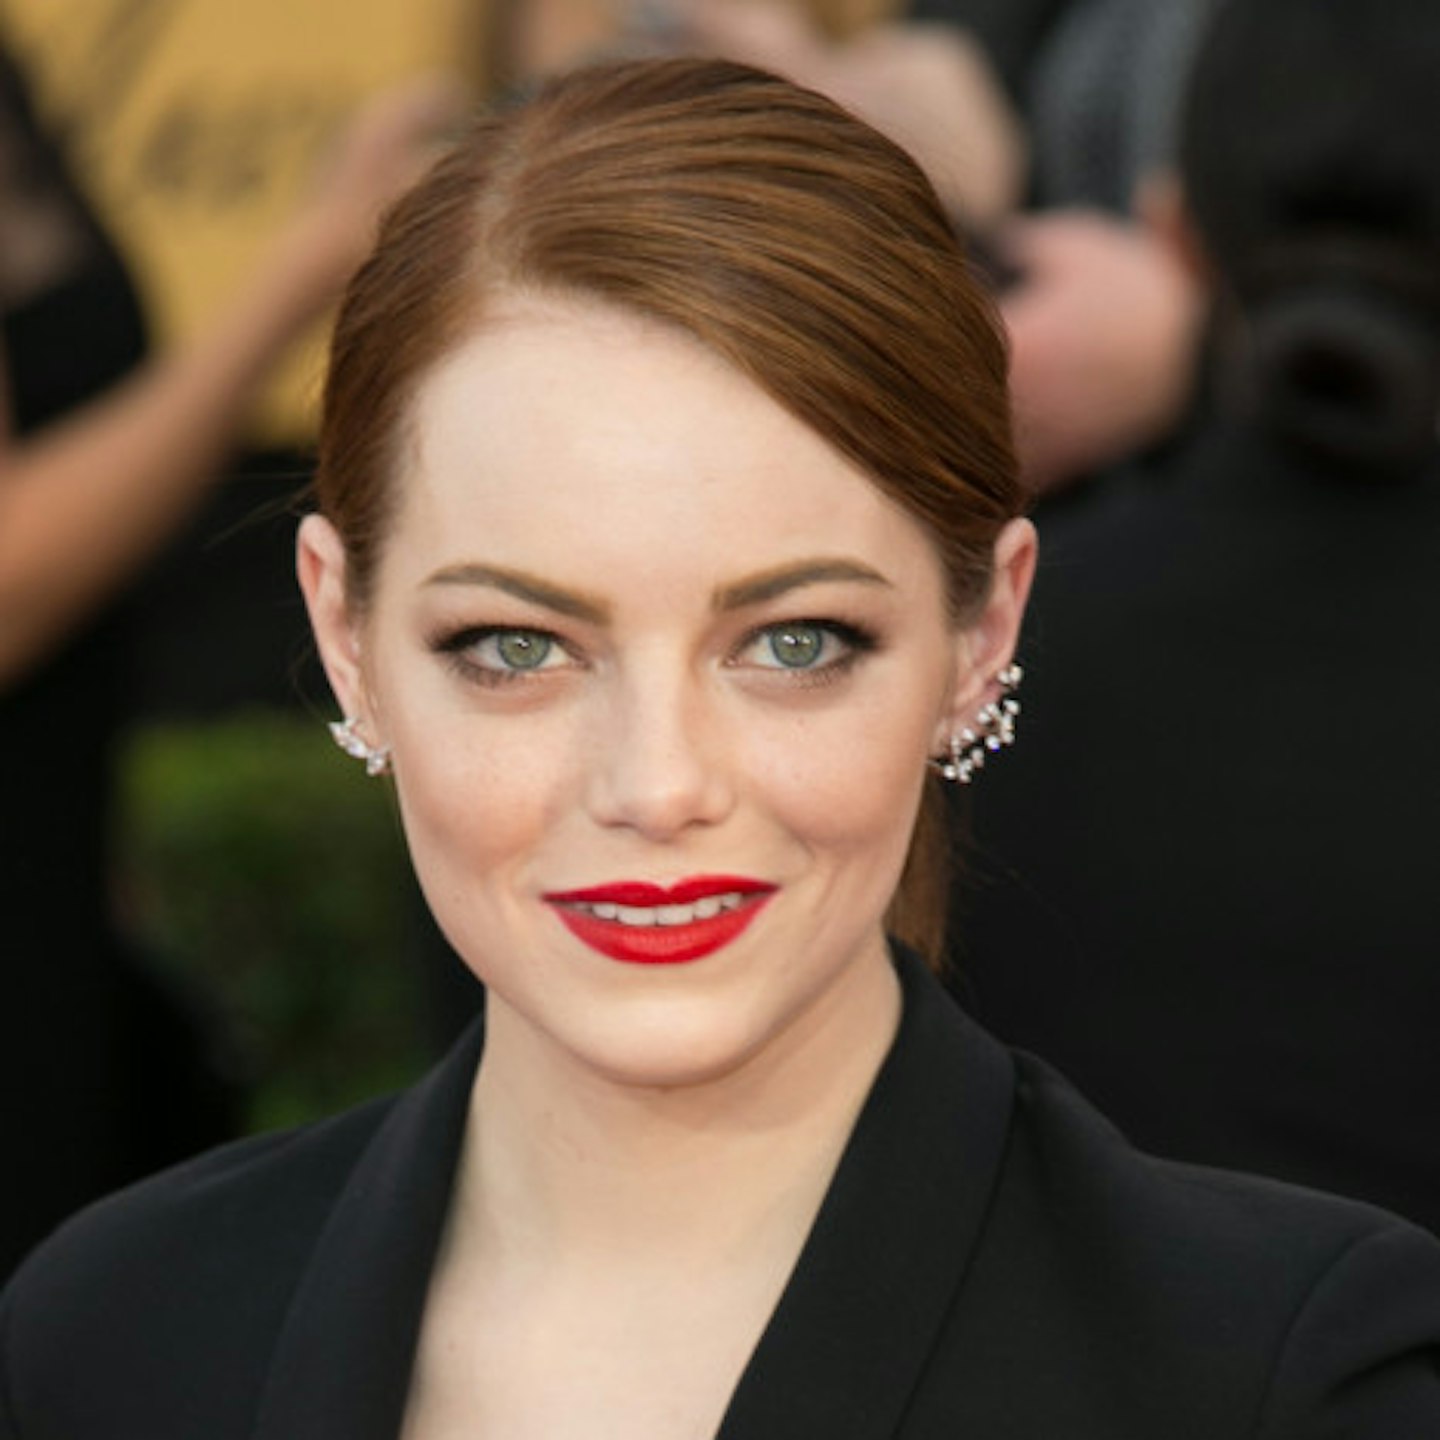 Emma Stone often rocks a red lip for celebrity events